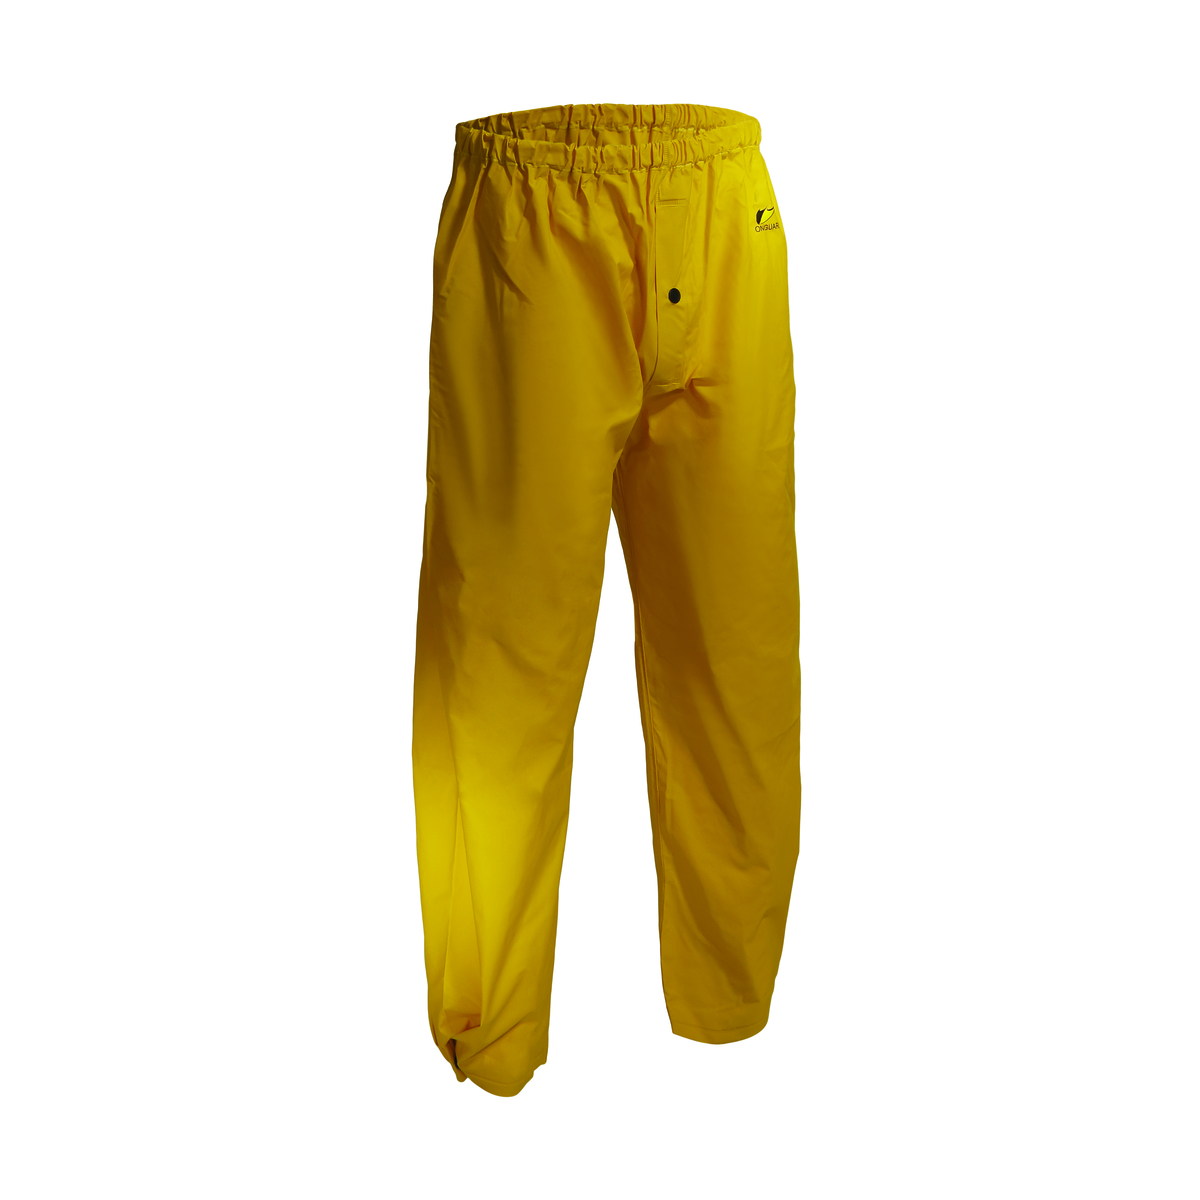 Dunlop® Protective Footwear Small Yellow Sitex .35 mm Polyester/PVC Pants